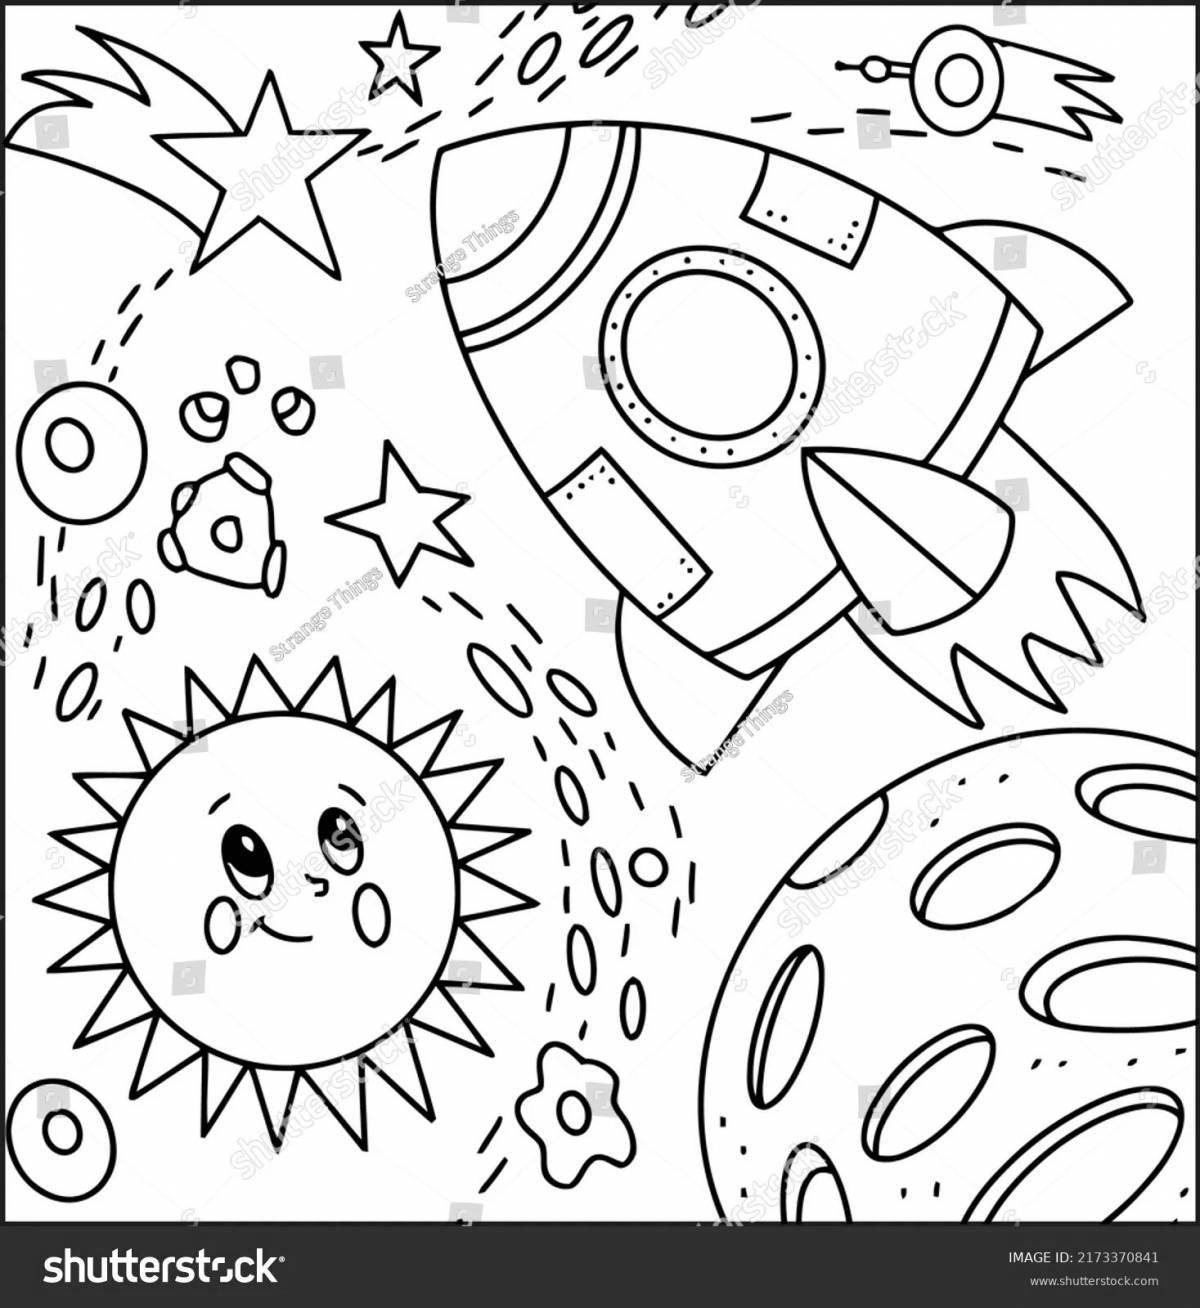 Incredible space coloring book for boys